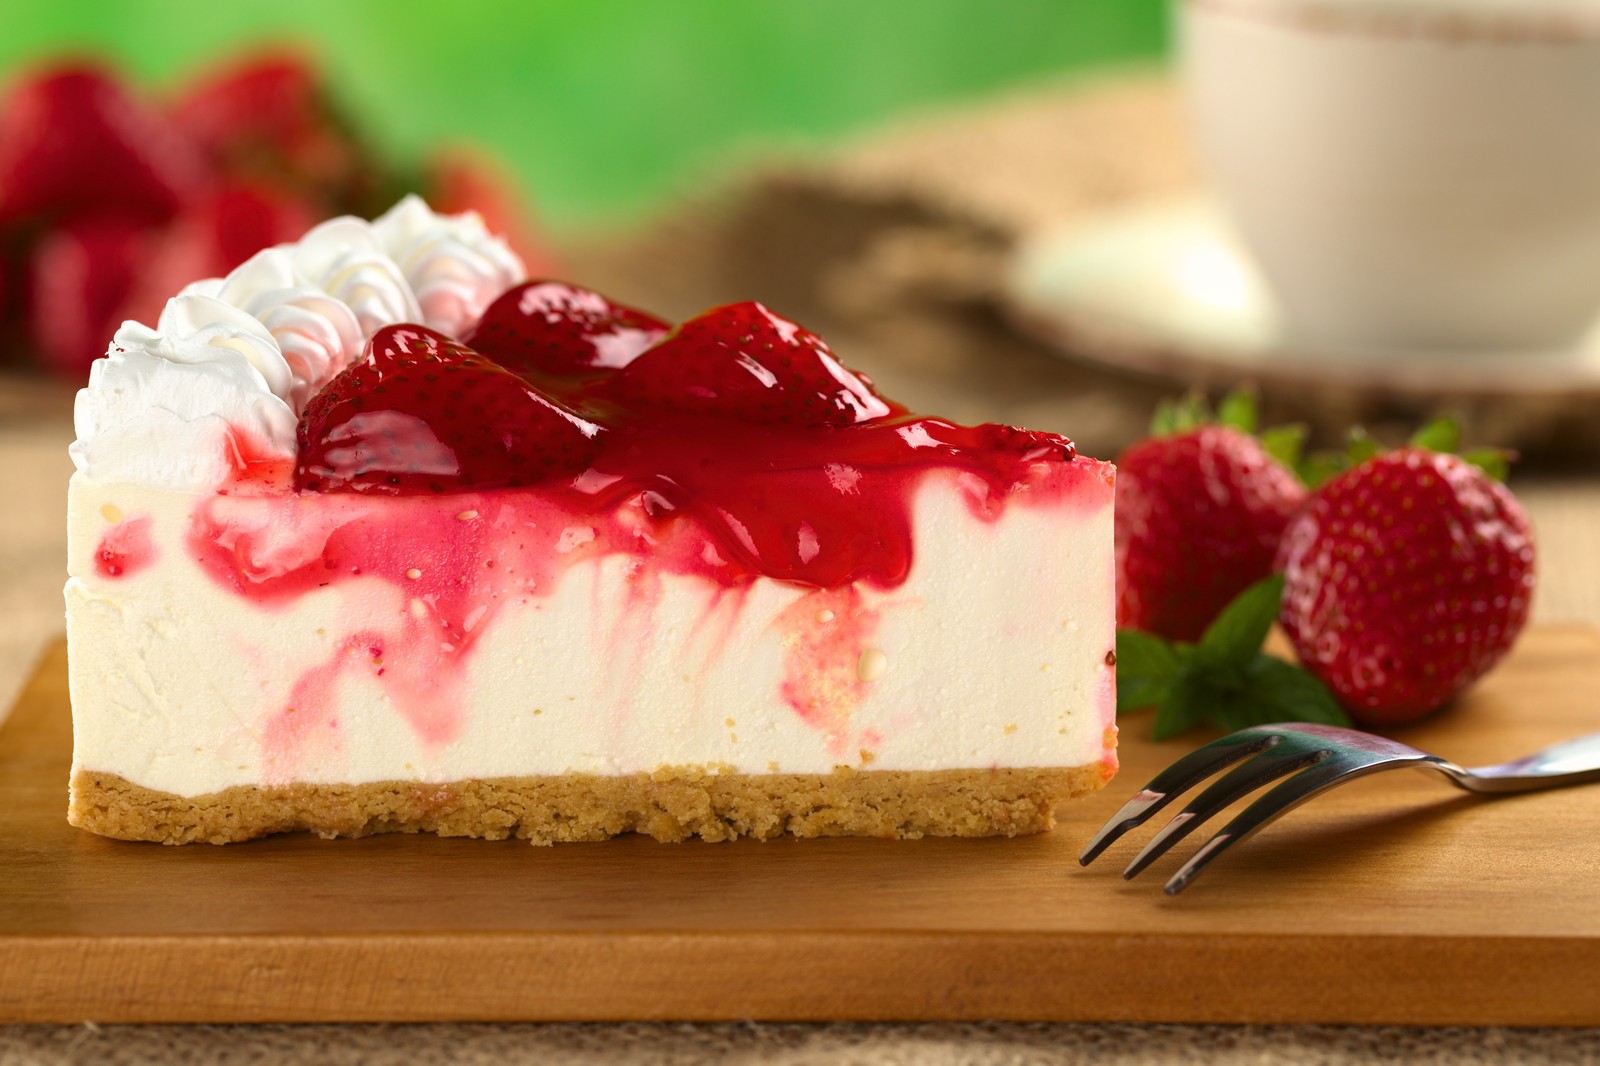 Cheese Cakes Order Online Bangalore - Cafe Hops Cheesecake Online Delivery Bangalore